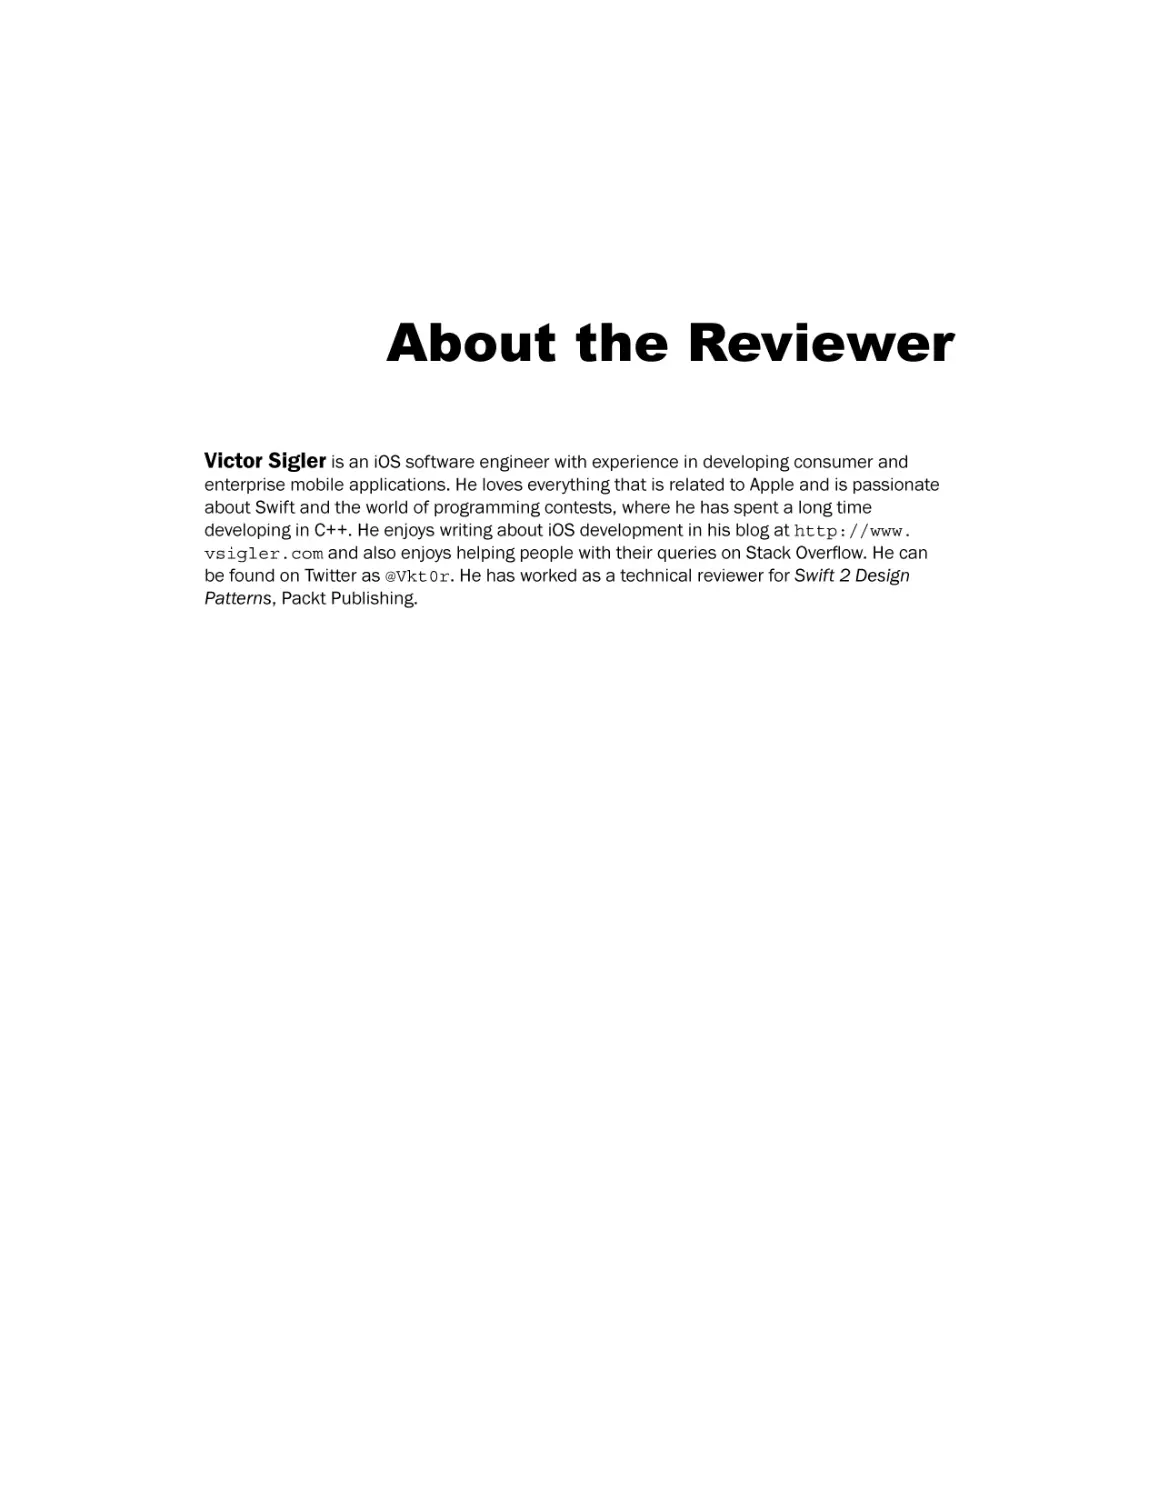 About the Reviewer